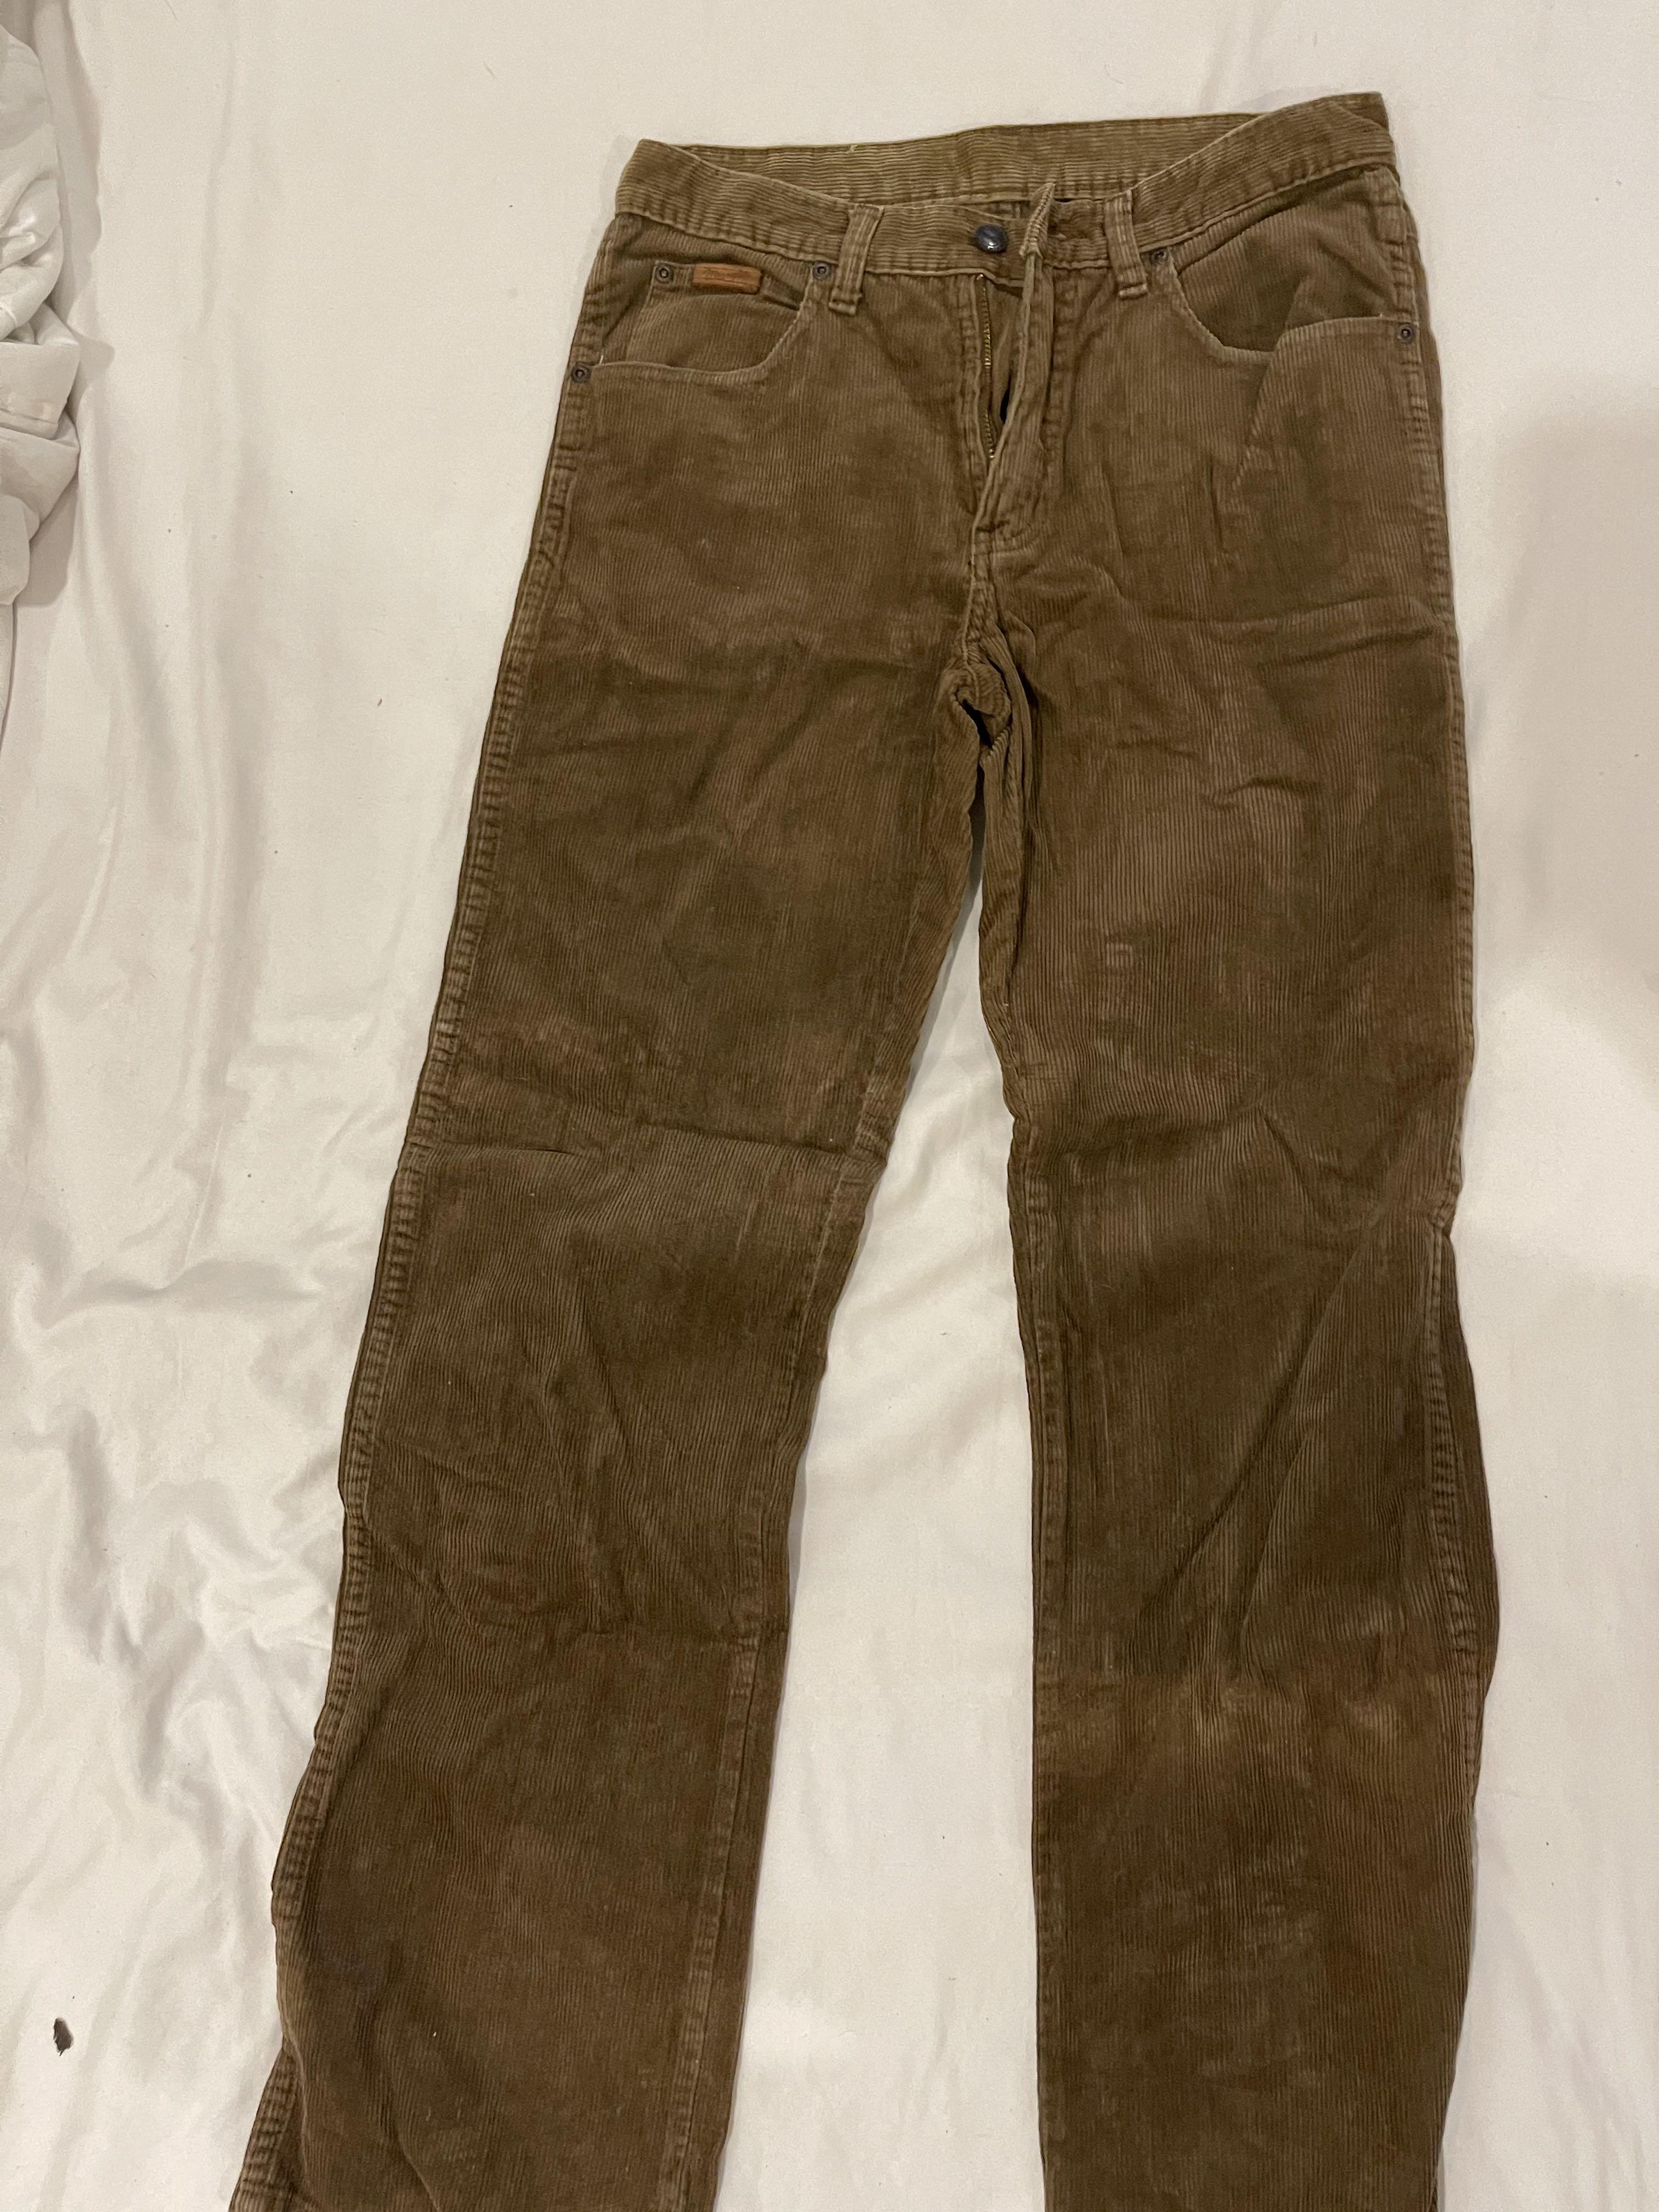 Mens Wrangler Casuals Flat Front Relaxed Fit Pants